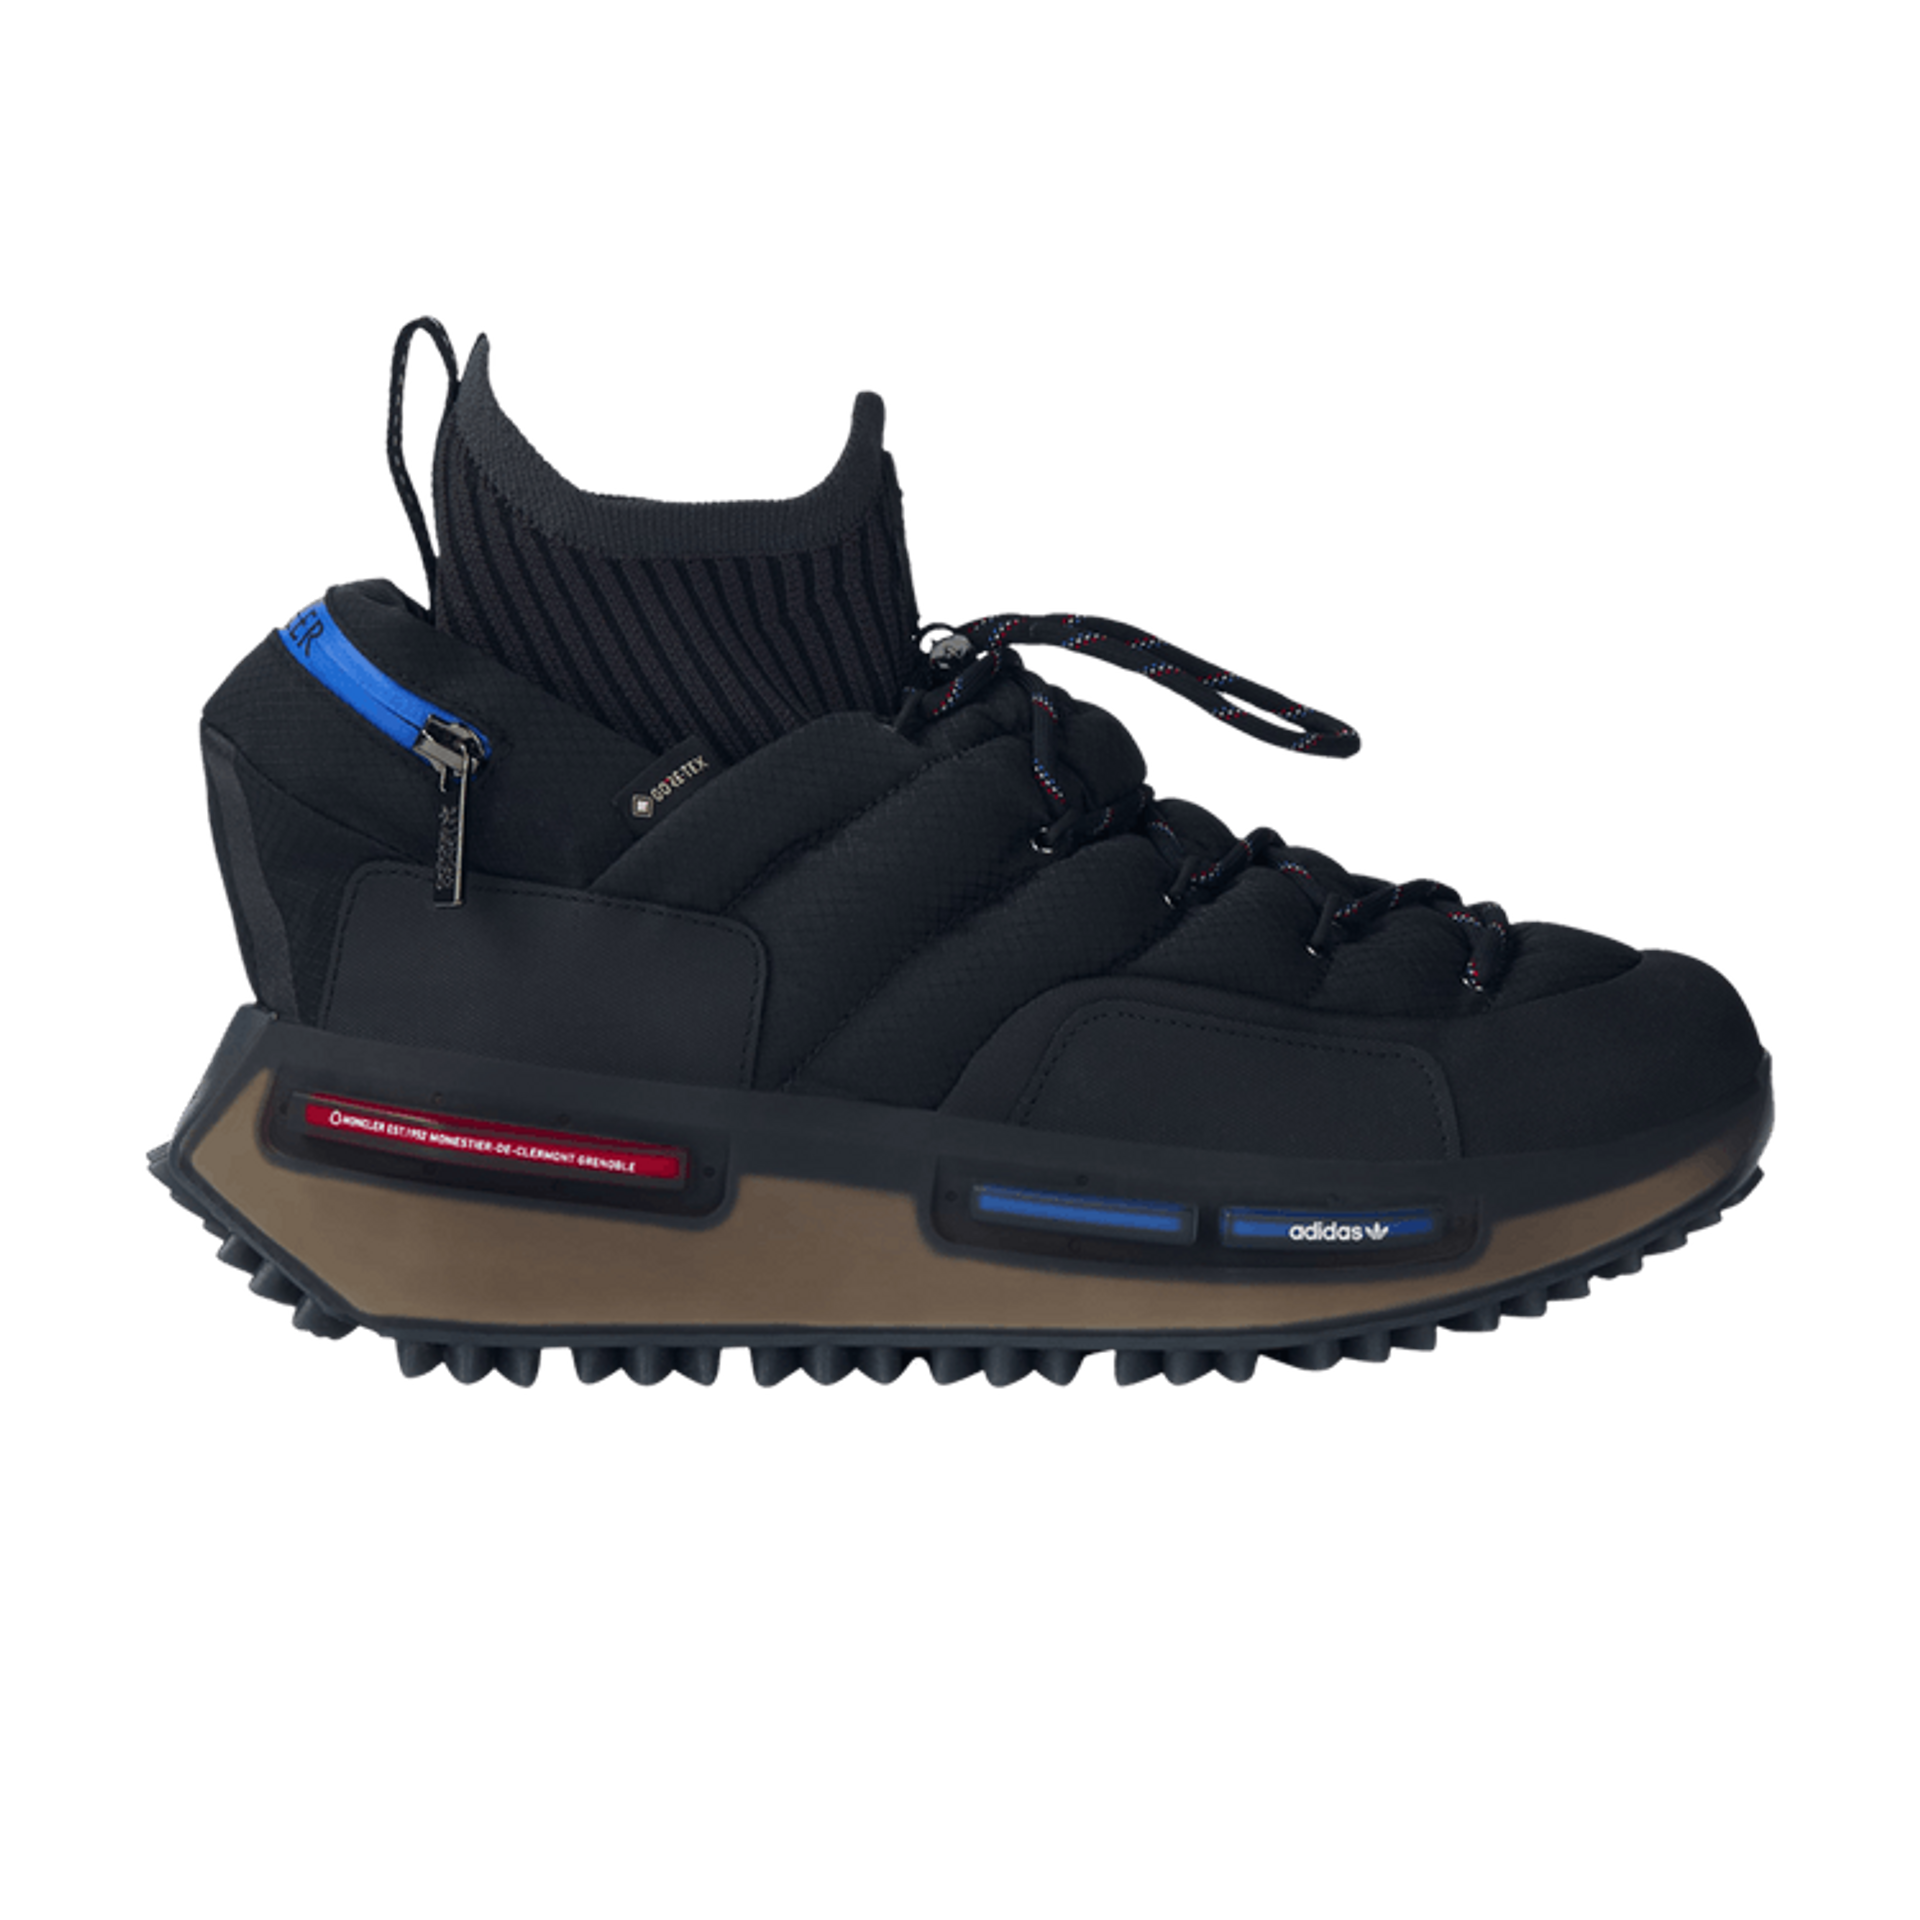 Moncler x adidas NMD_S1 GORE-TEX 'The Art of Exploration - Black'